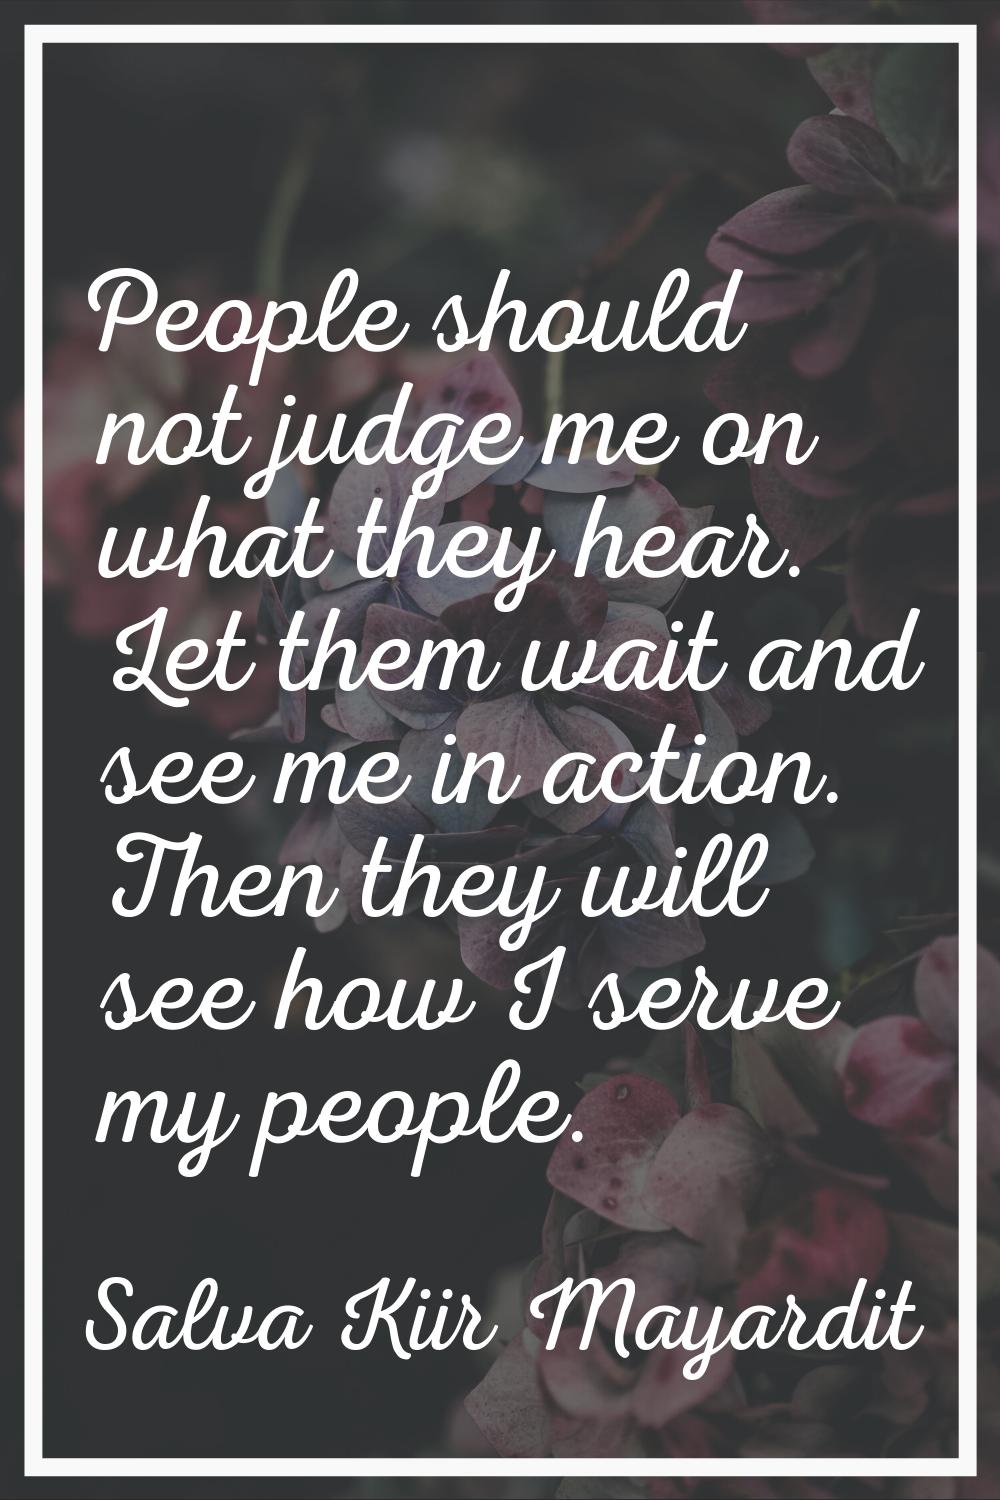 People should not judge me on what they hear. Let them wait and see me in action. Then they will se